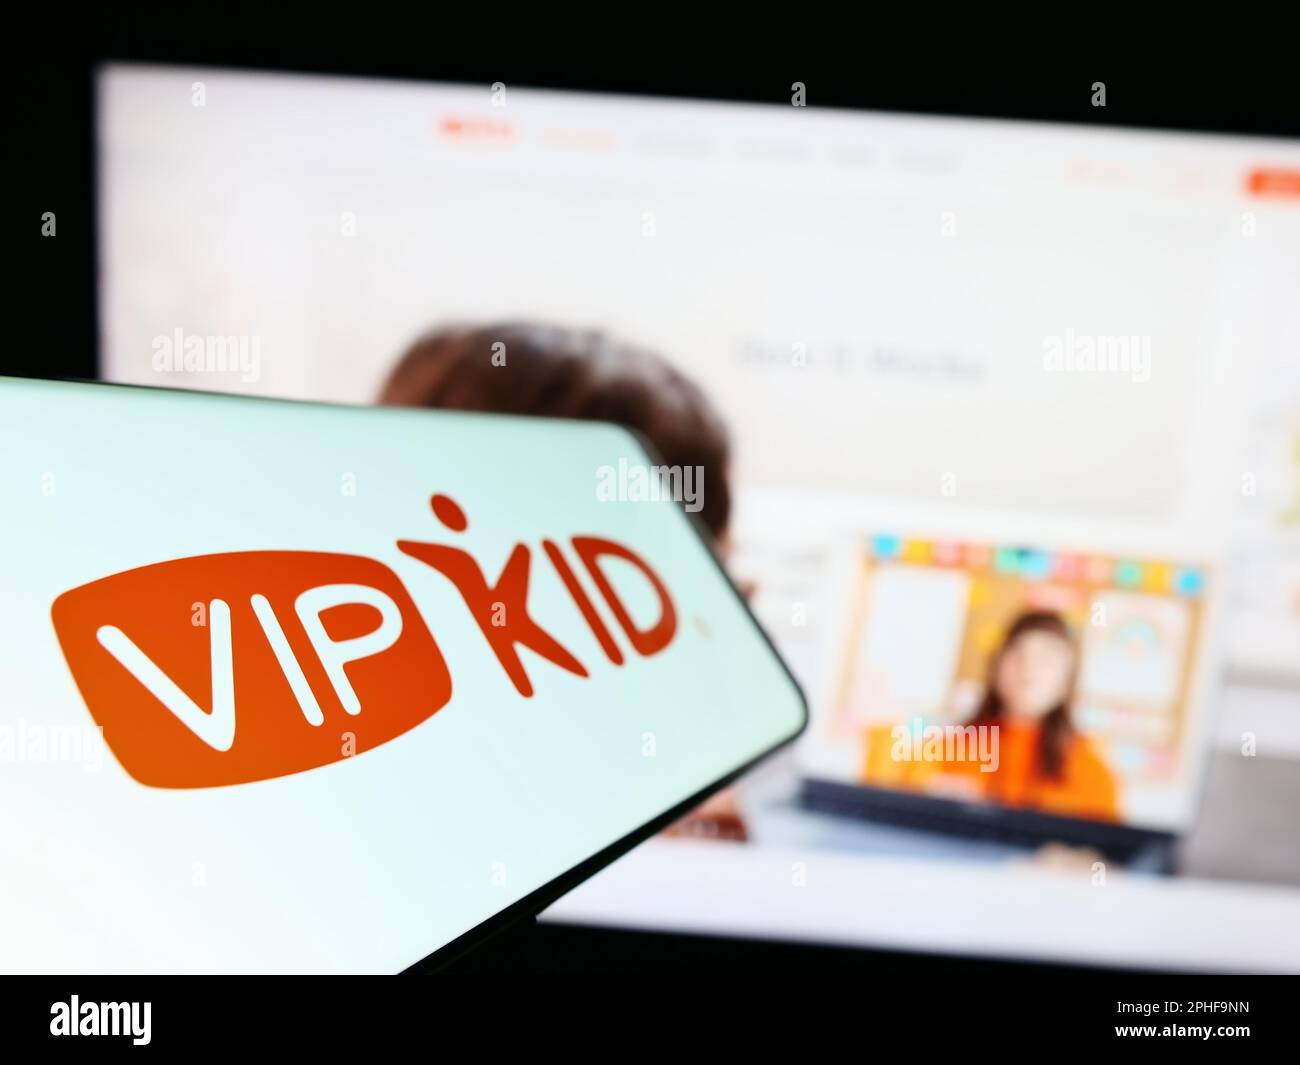 Smartphone with logo of e-learning company VIPKid on screen in front of business website. Focus on left of phone display. Stock Photo